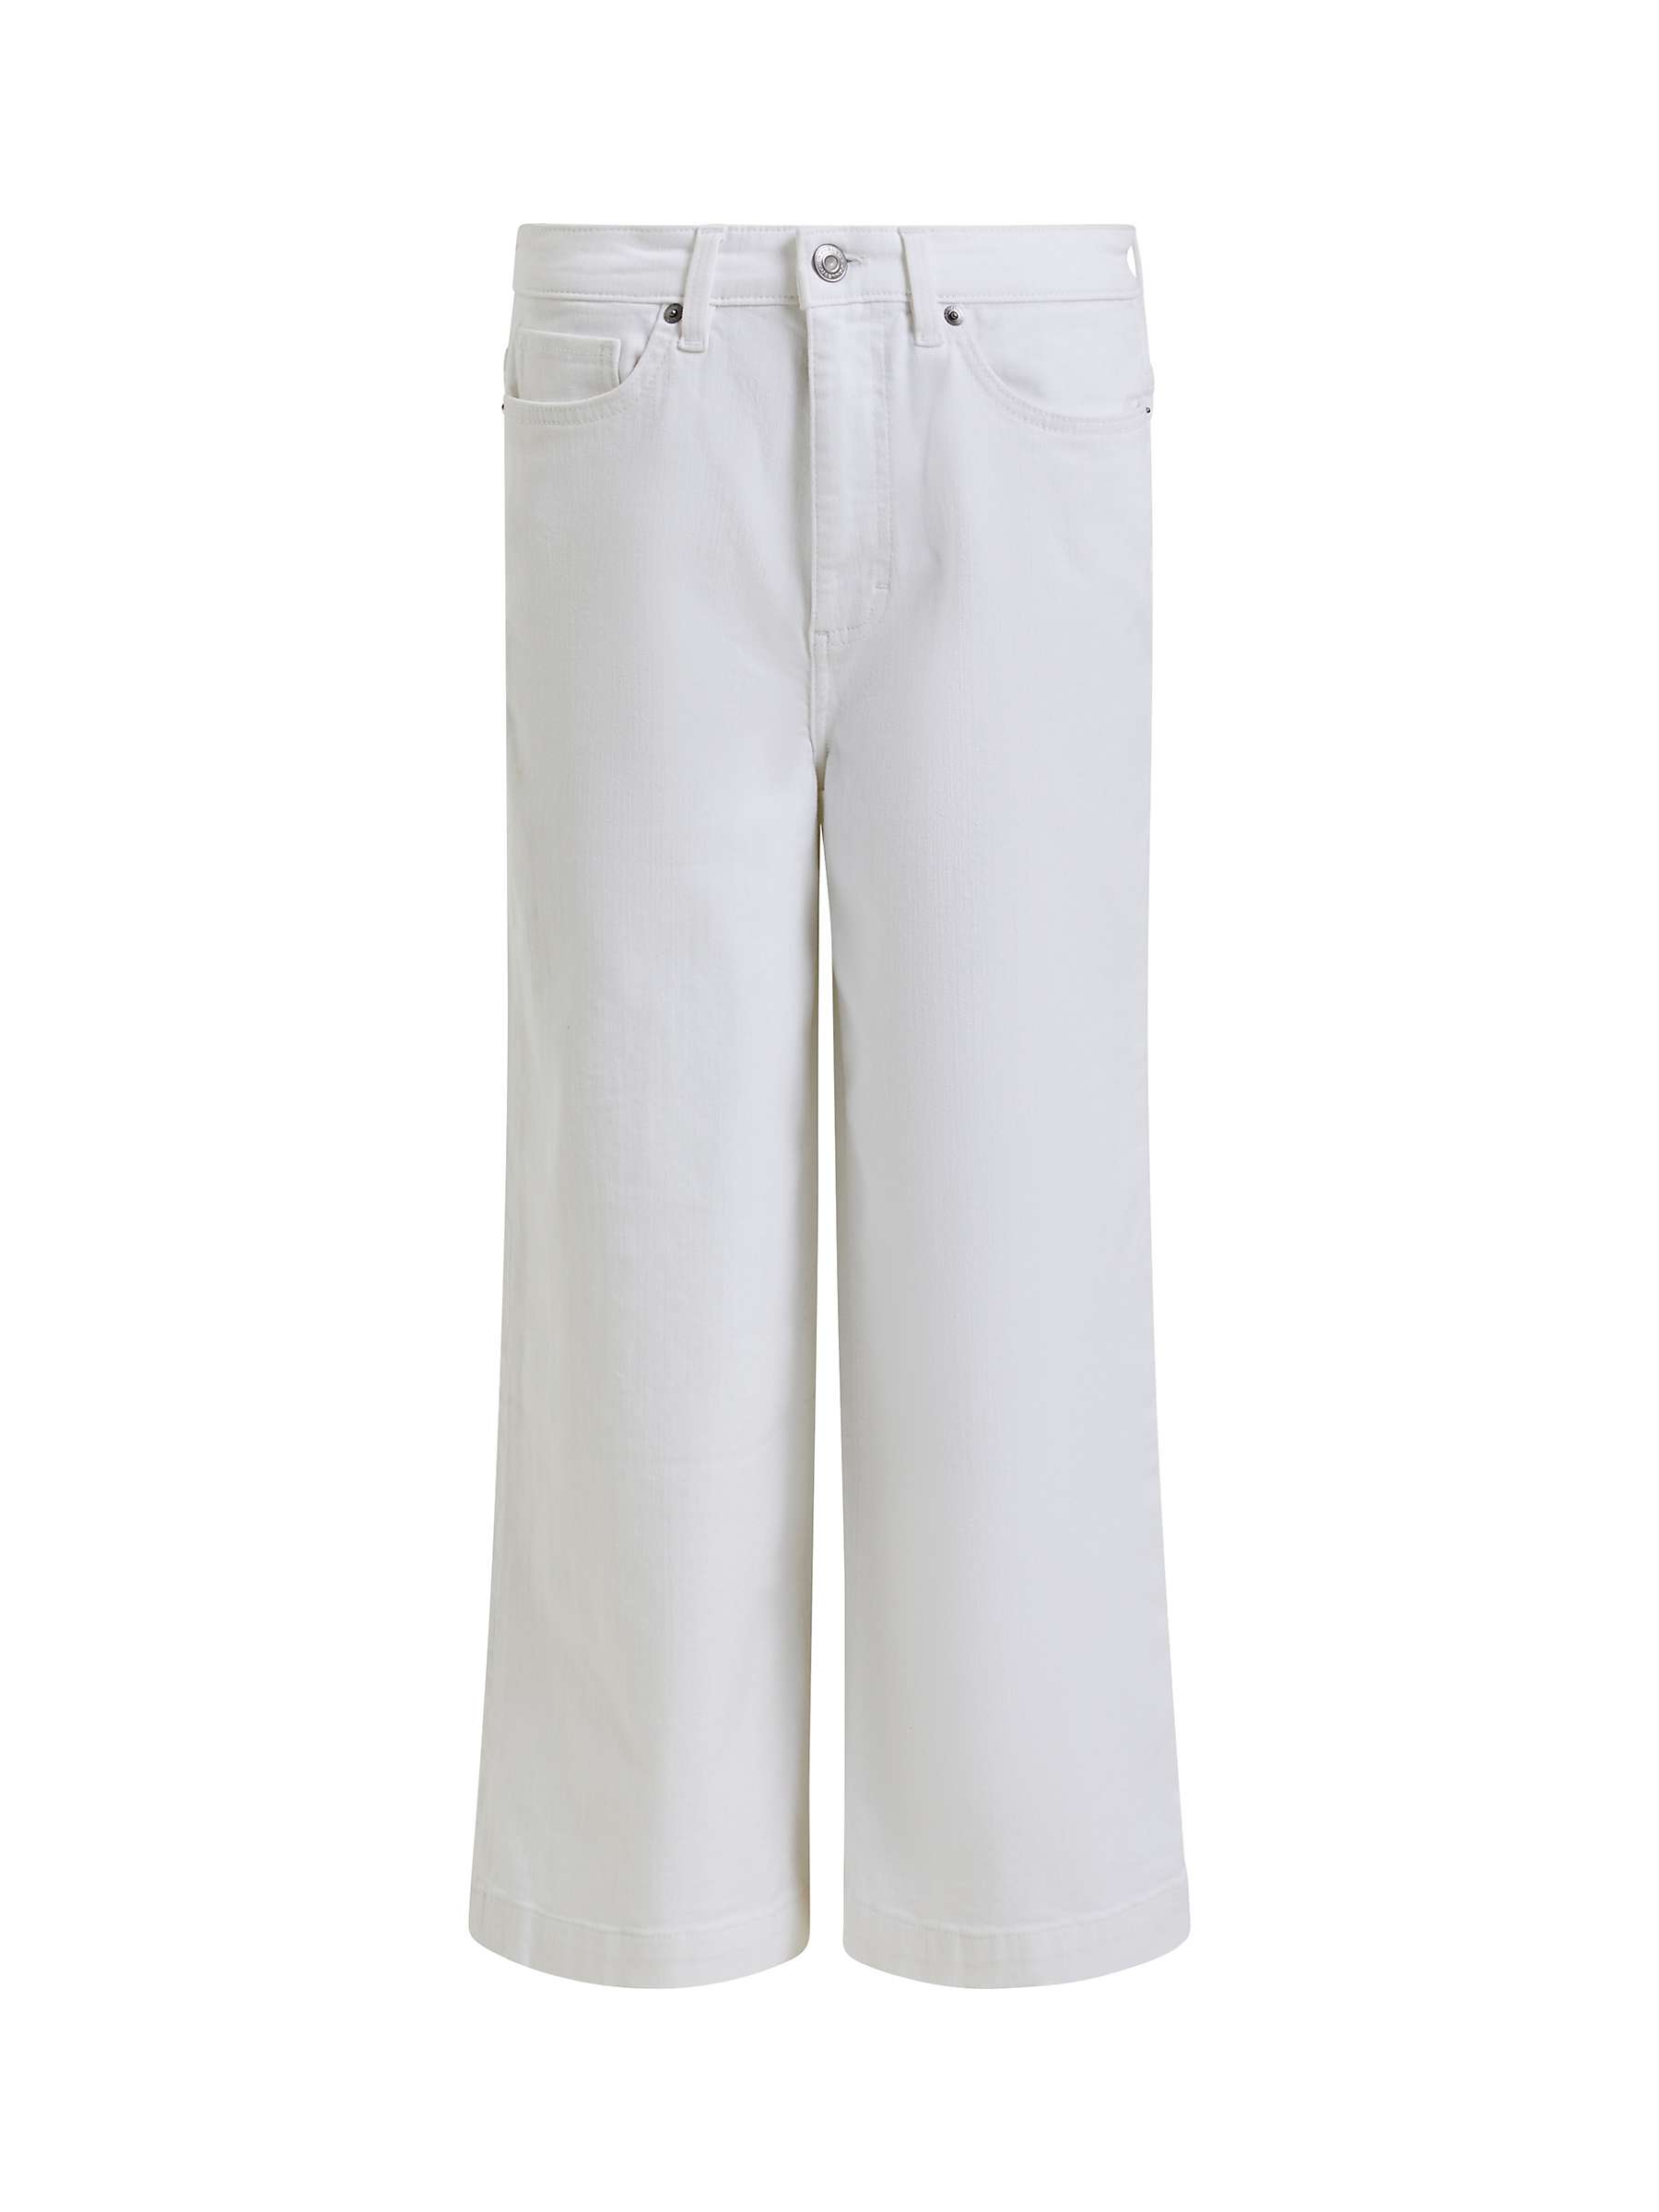 Buy French Connection Conscious Stretch Culottes, White Online at johnlewis.com